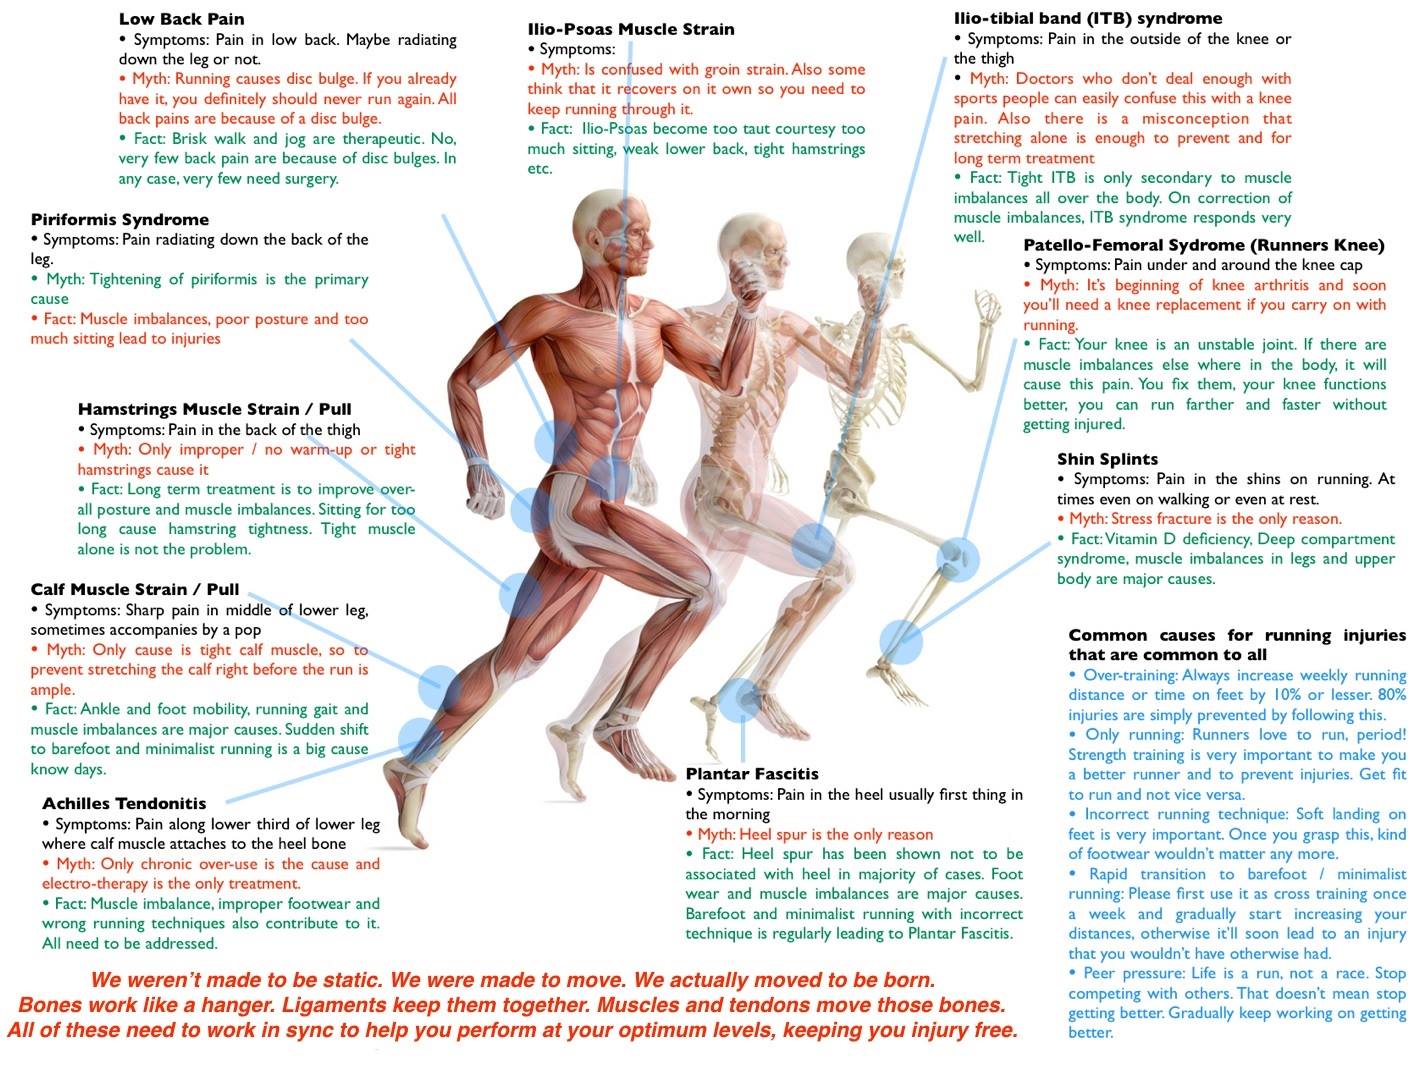 Runners: Stay on pace with chiropractic! - Run Galway Bay